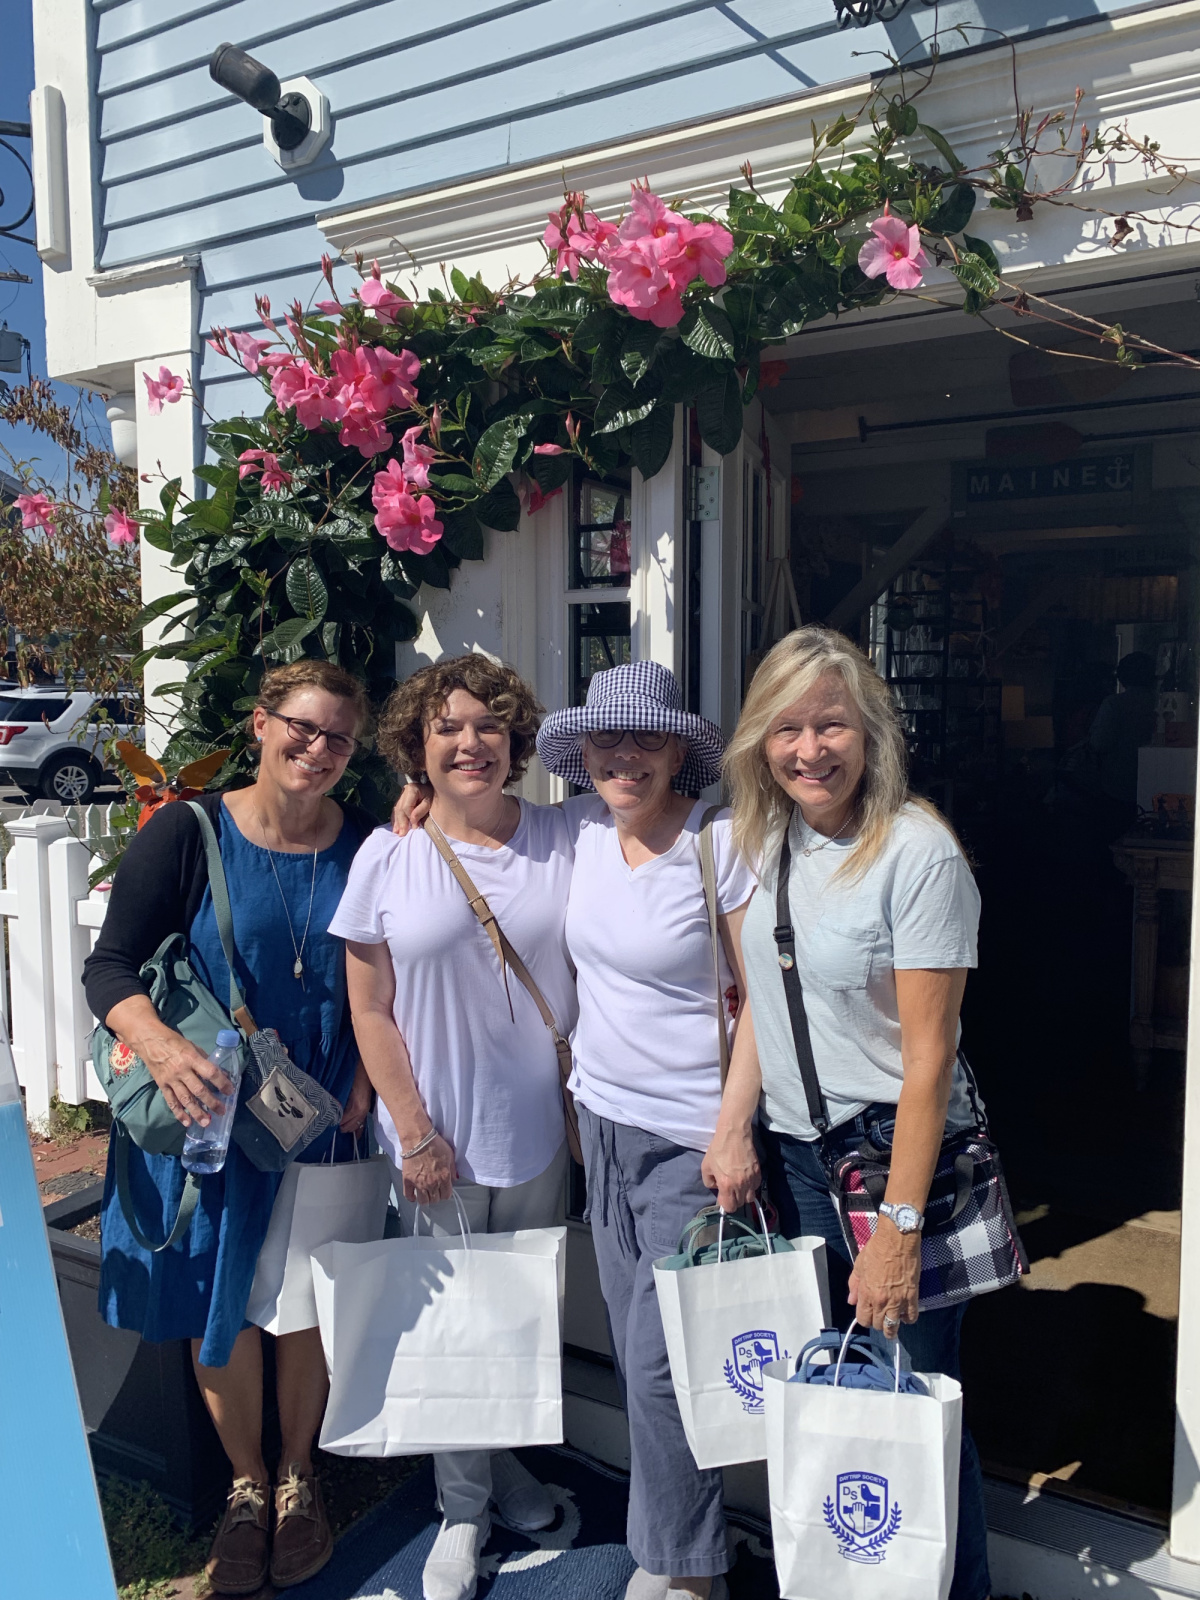 Susan, Gayle, Paula, and Angie in beautiful Kennebunk Maine in September.